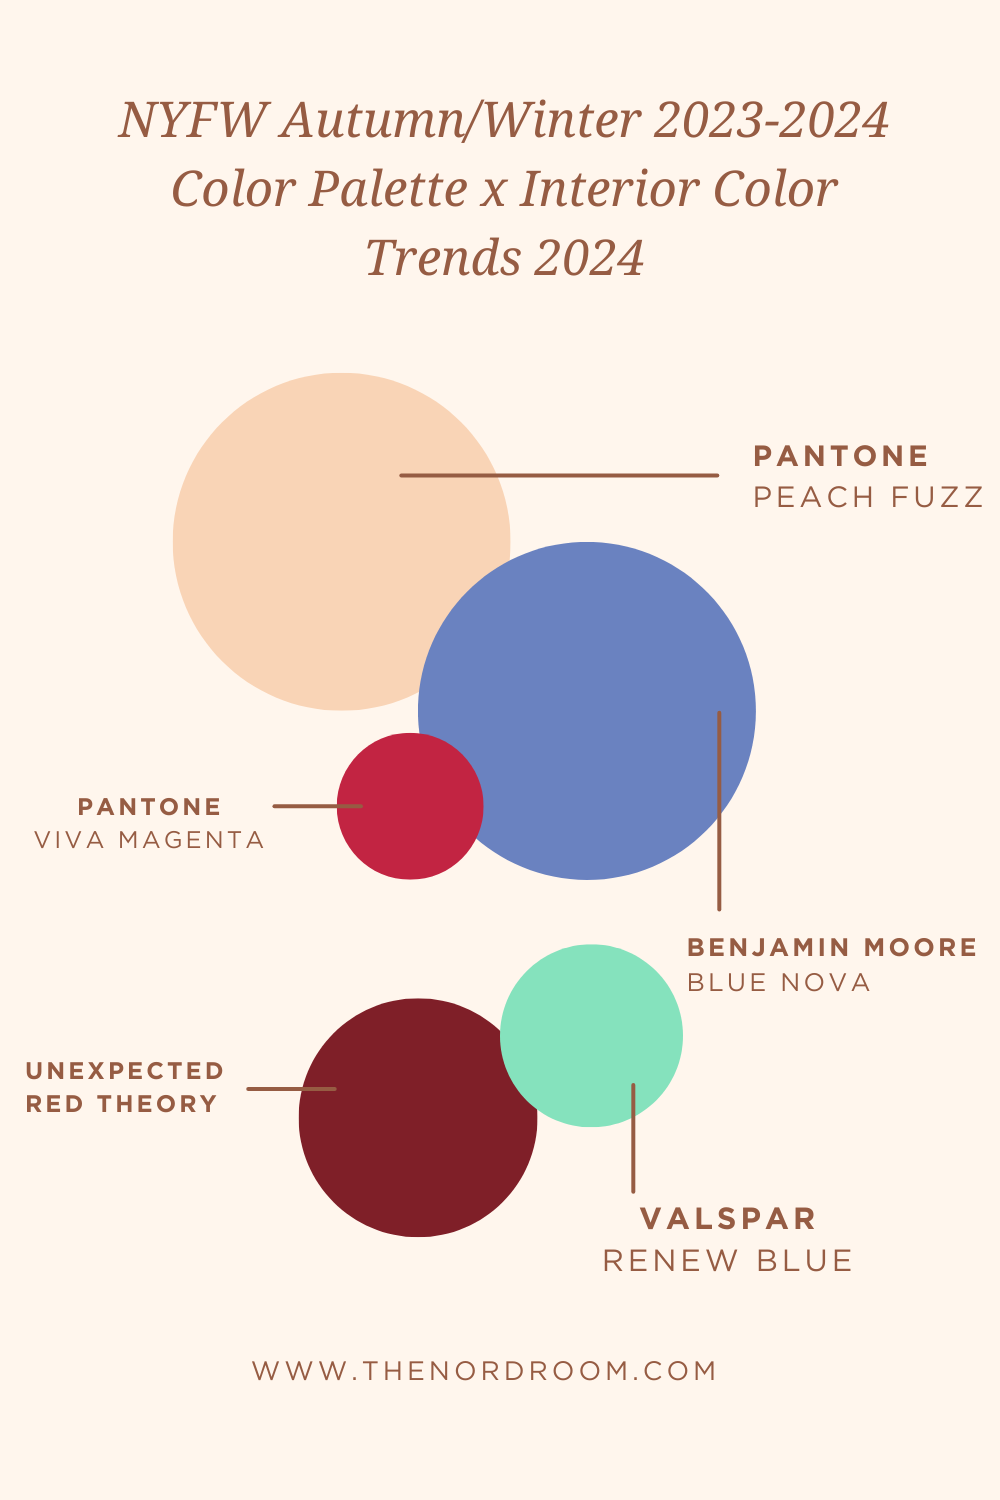 NYFW-color-palette-interior-design-color-of-the-year-2024-nordroom